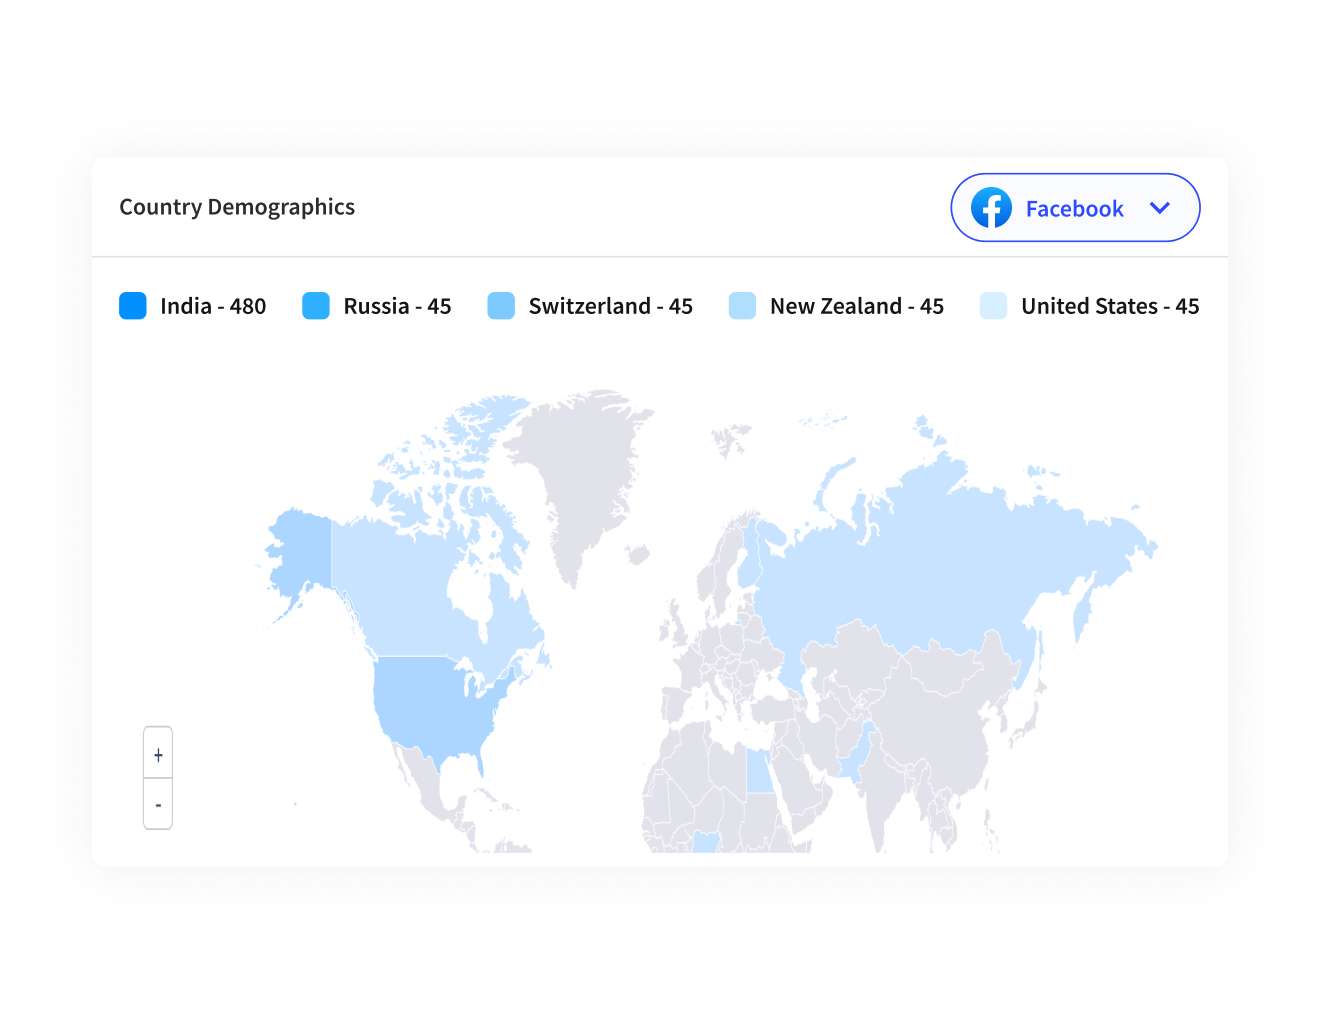 World map visualization of country demographics with data points for India, Russia, Switzerland, New Zealand, and the United States from a Facebook analytics report.